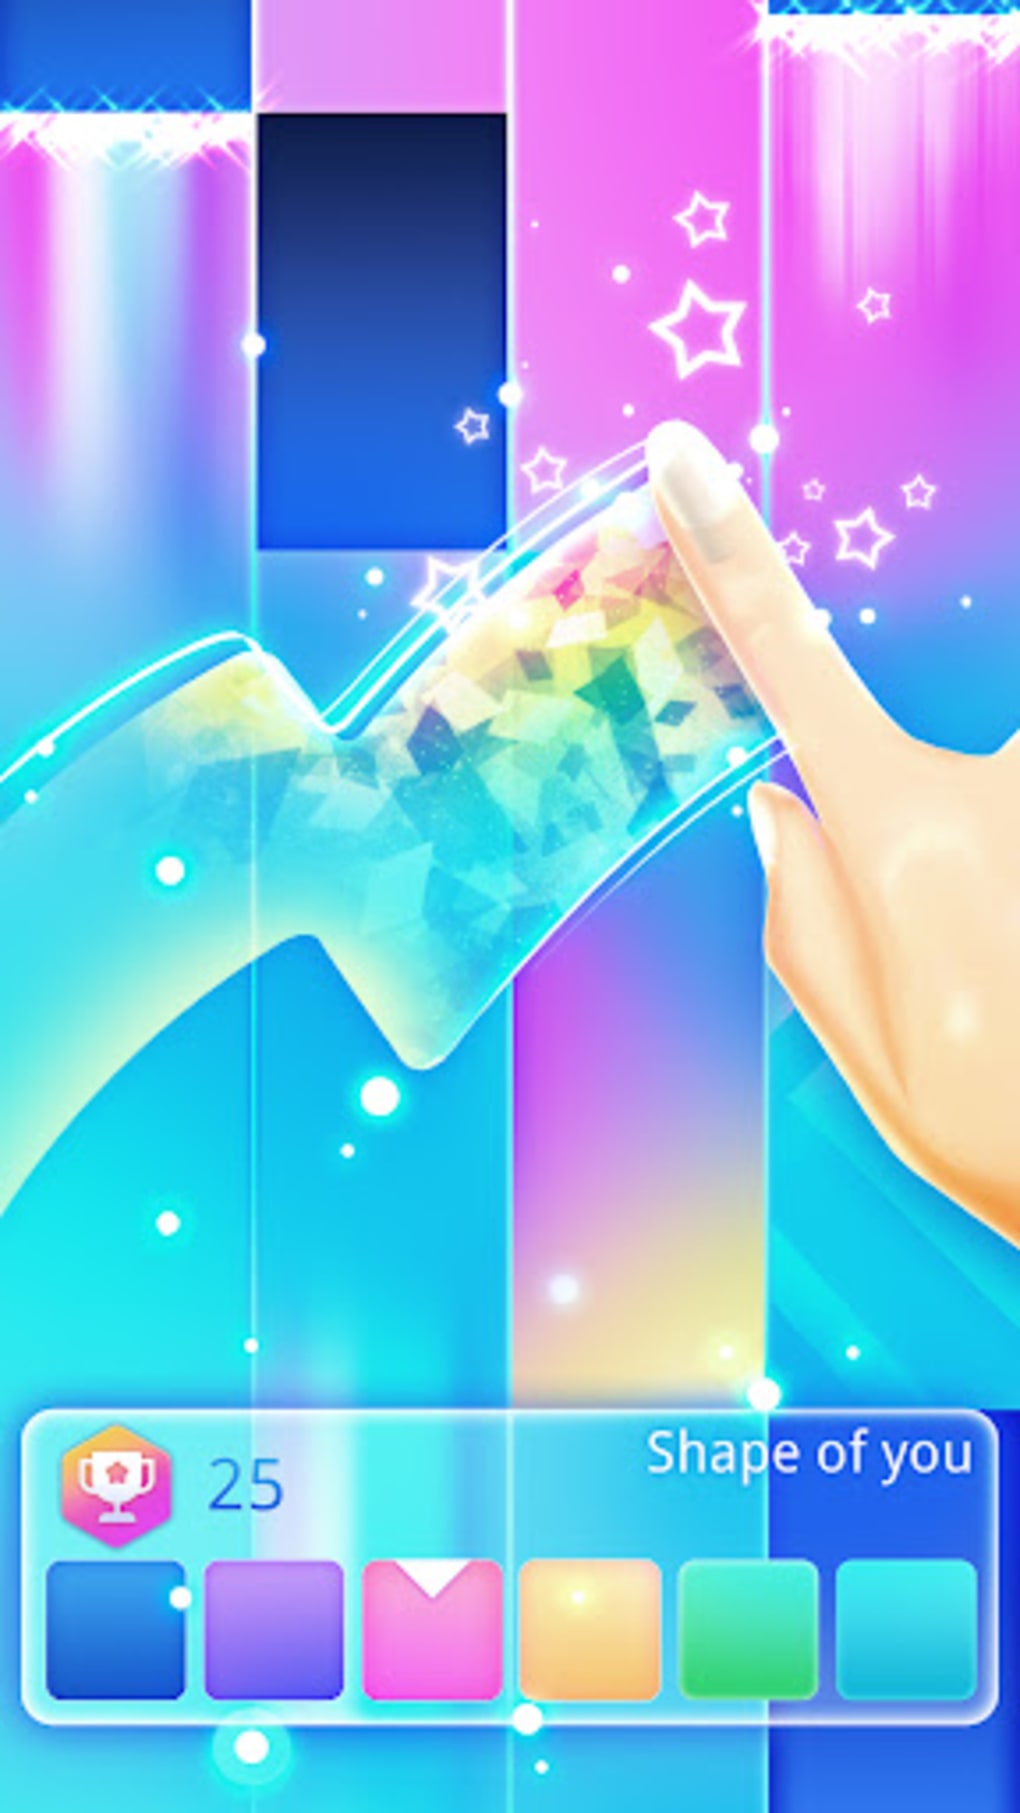 Piano Music Go 2020: EDM Piano Games APK for Android - Download